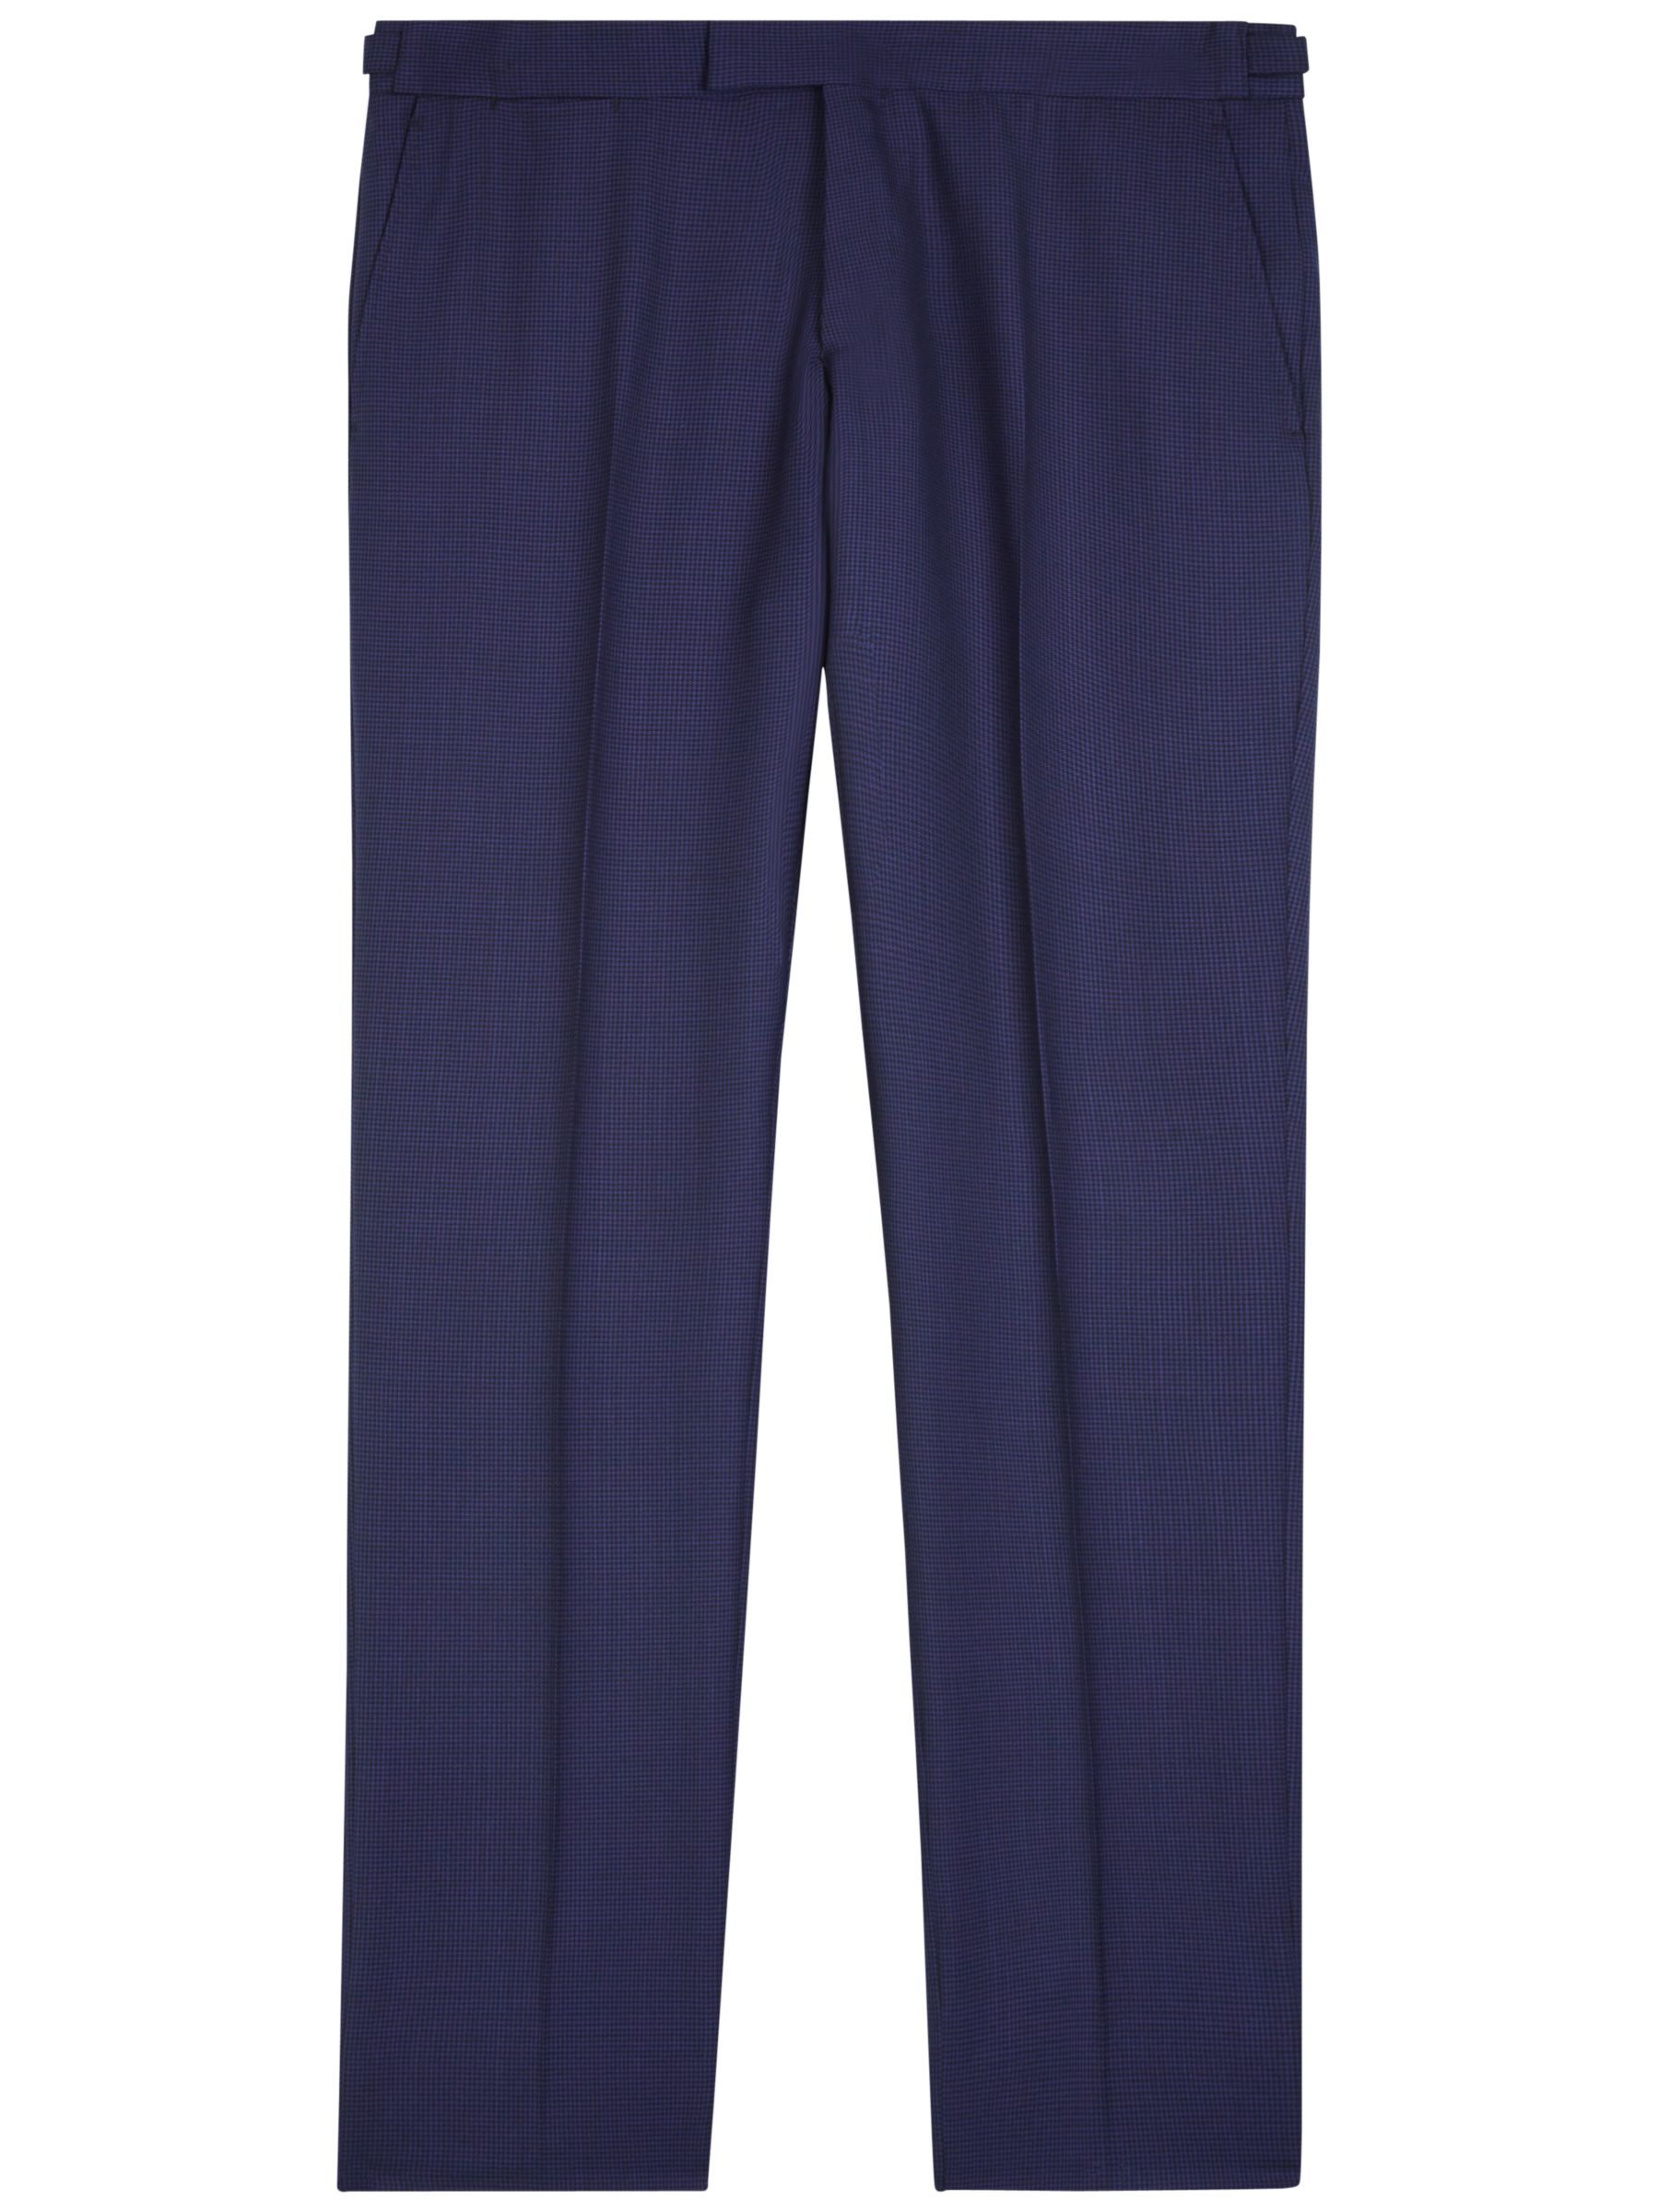 Jaeger Puppytooth Double Breasted Classic Suit Trousers, Blue